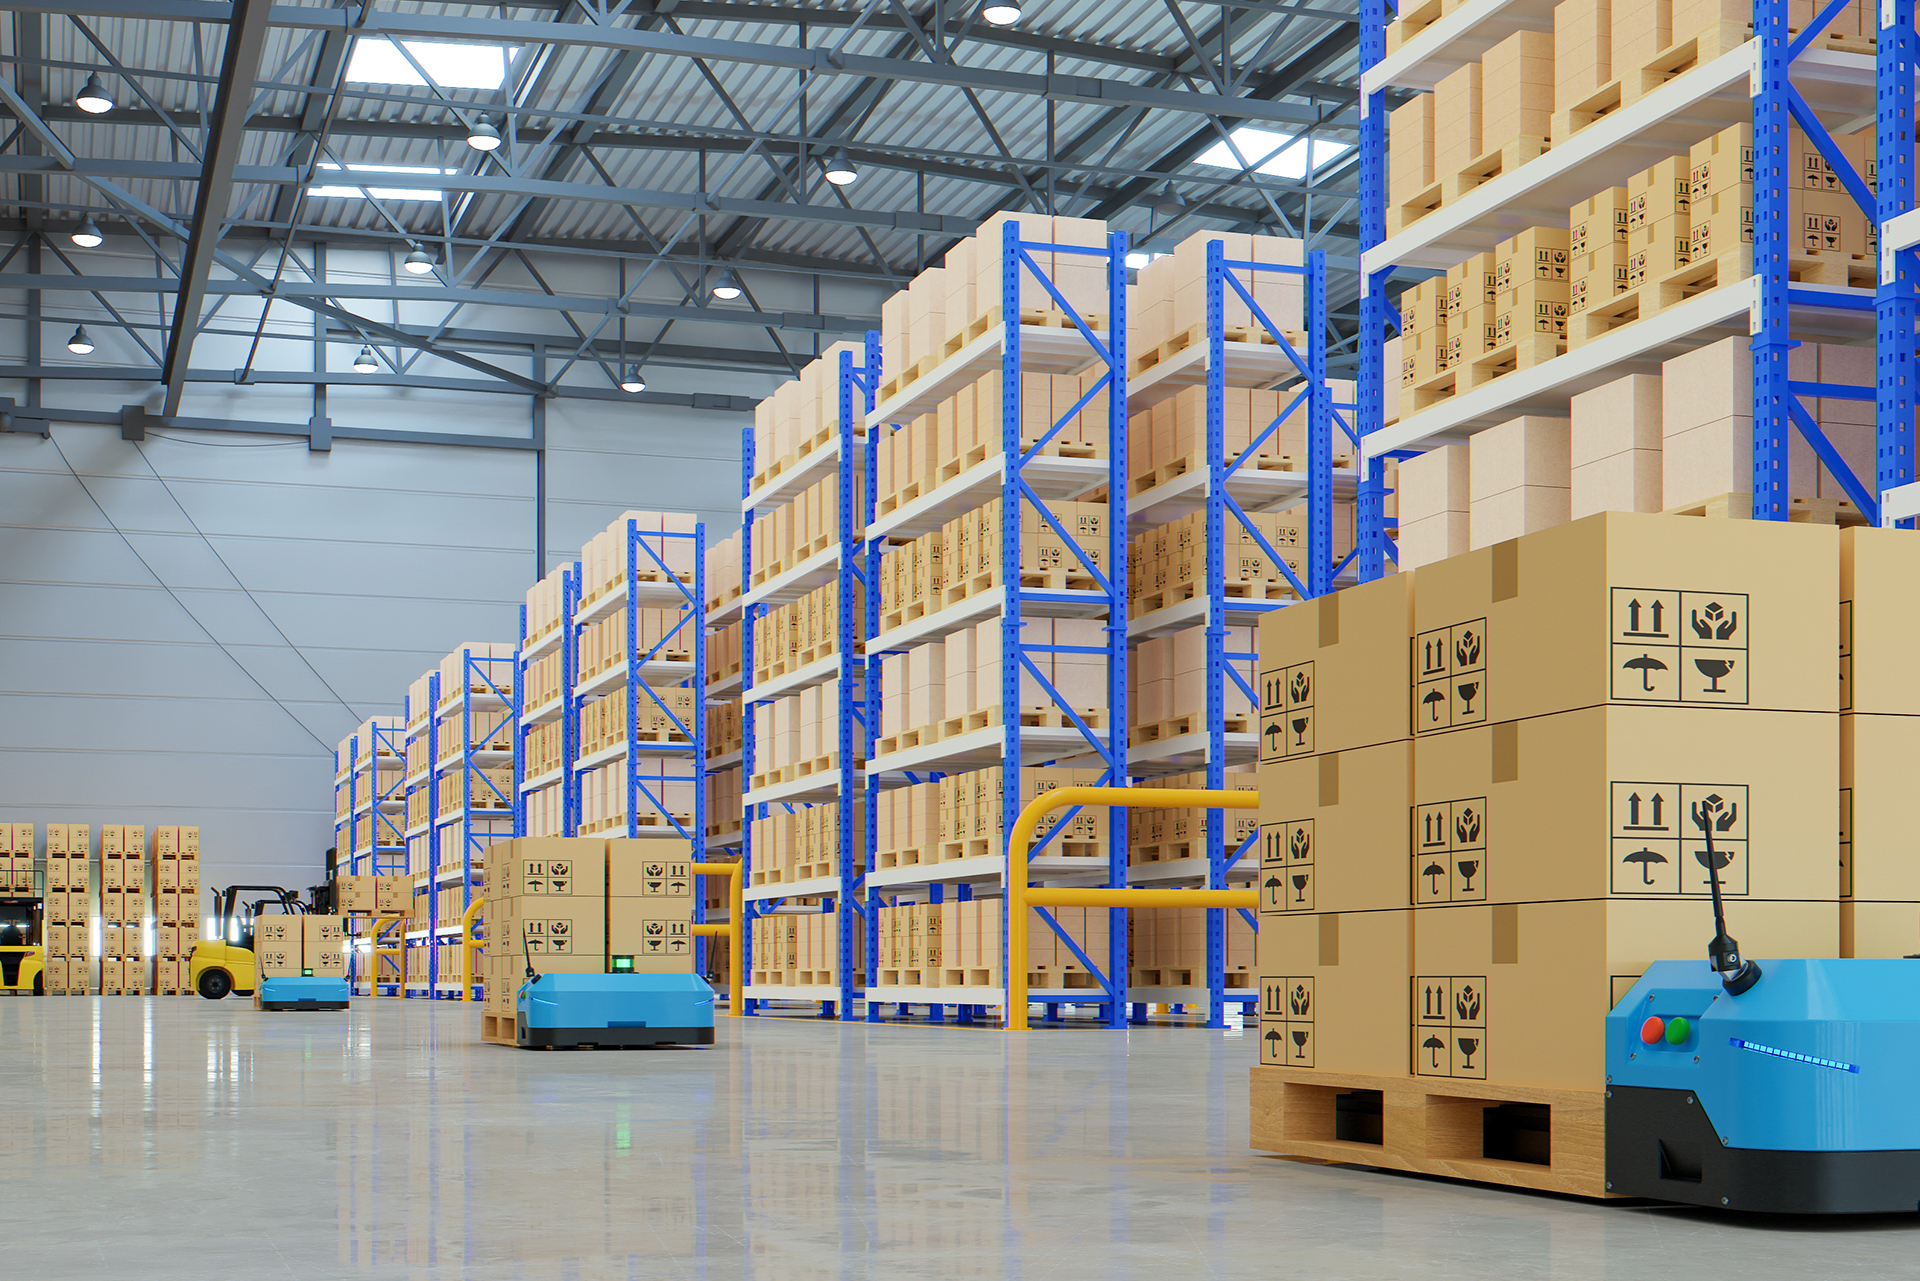 Expansion for most fast-moving consumer goods companies happens on the back of a new distributor or a super stockist—that works in a certain territory and ensures access of products to various retailers in the area